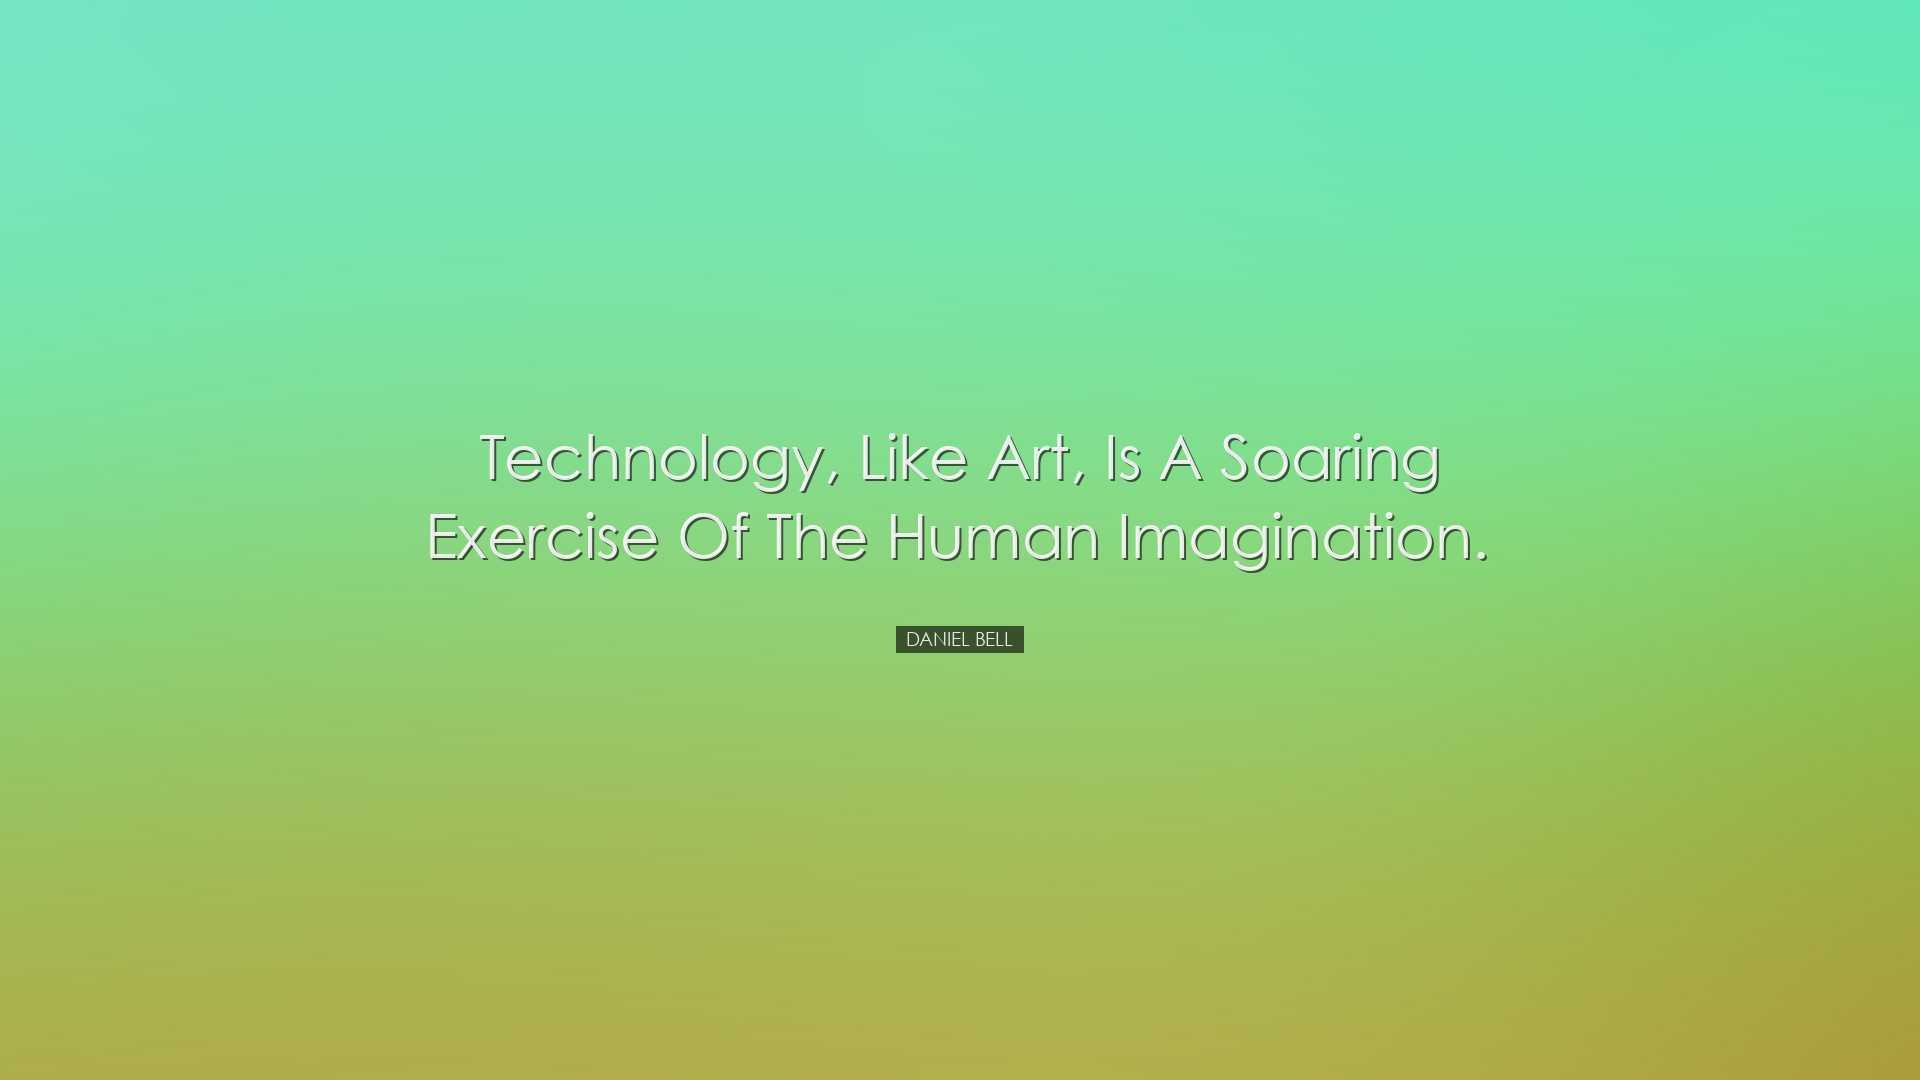 Technology, like art, is a soaring exercise of the human imaginati